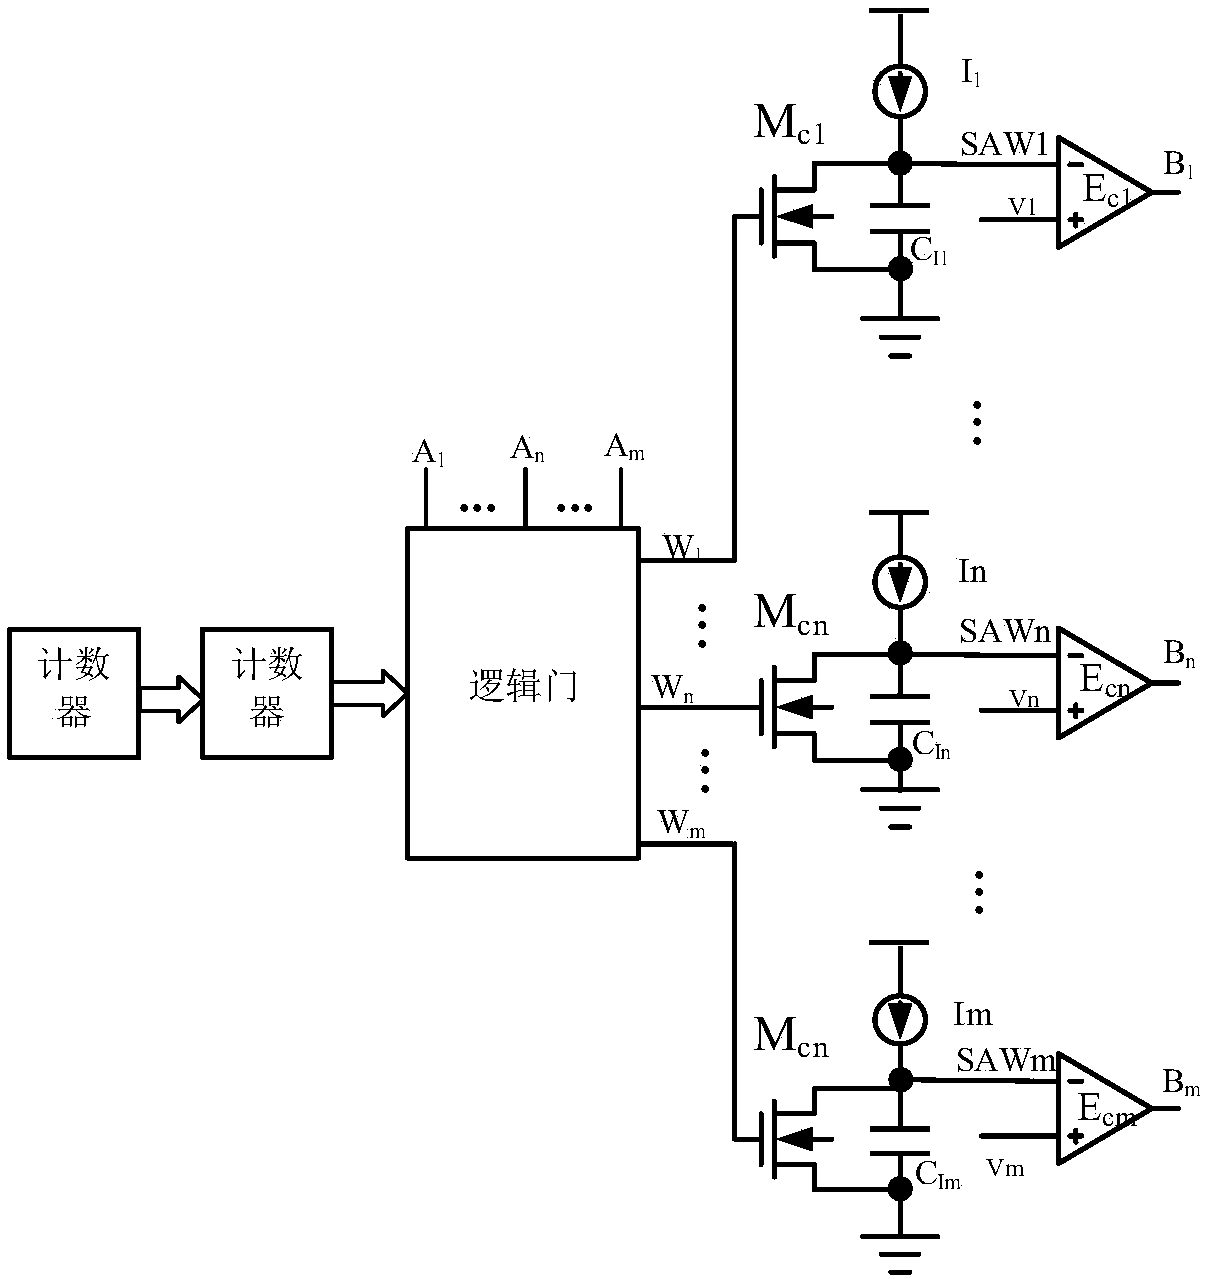 A multi-channel LED dimming circuit